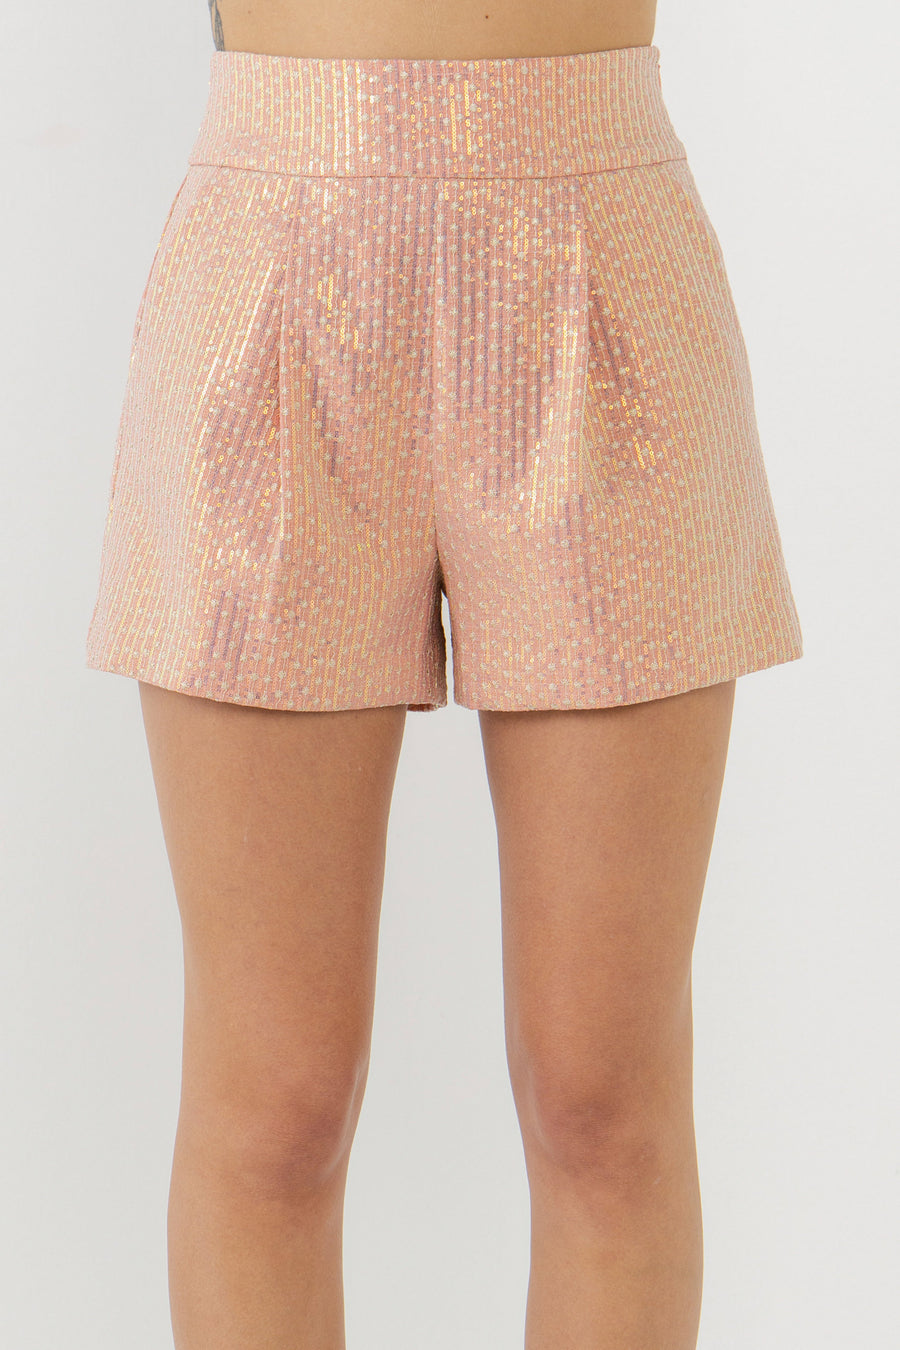 FREE THE ROSES-Sequins Embroidered Shorts-SHORTS available at Objectrare